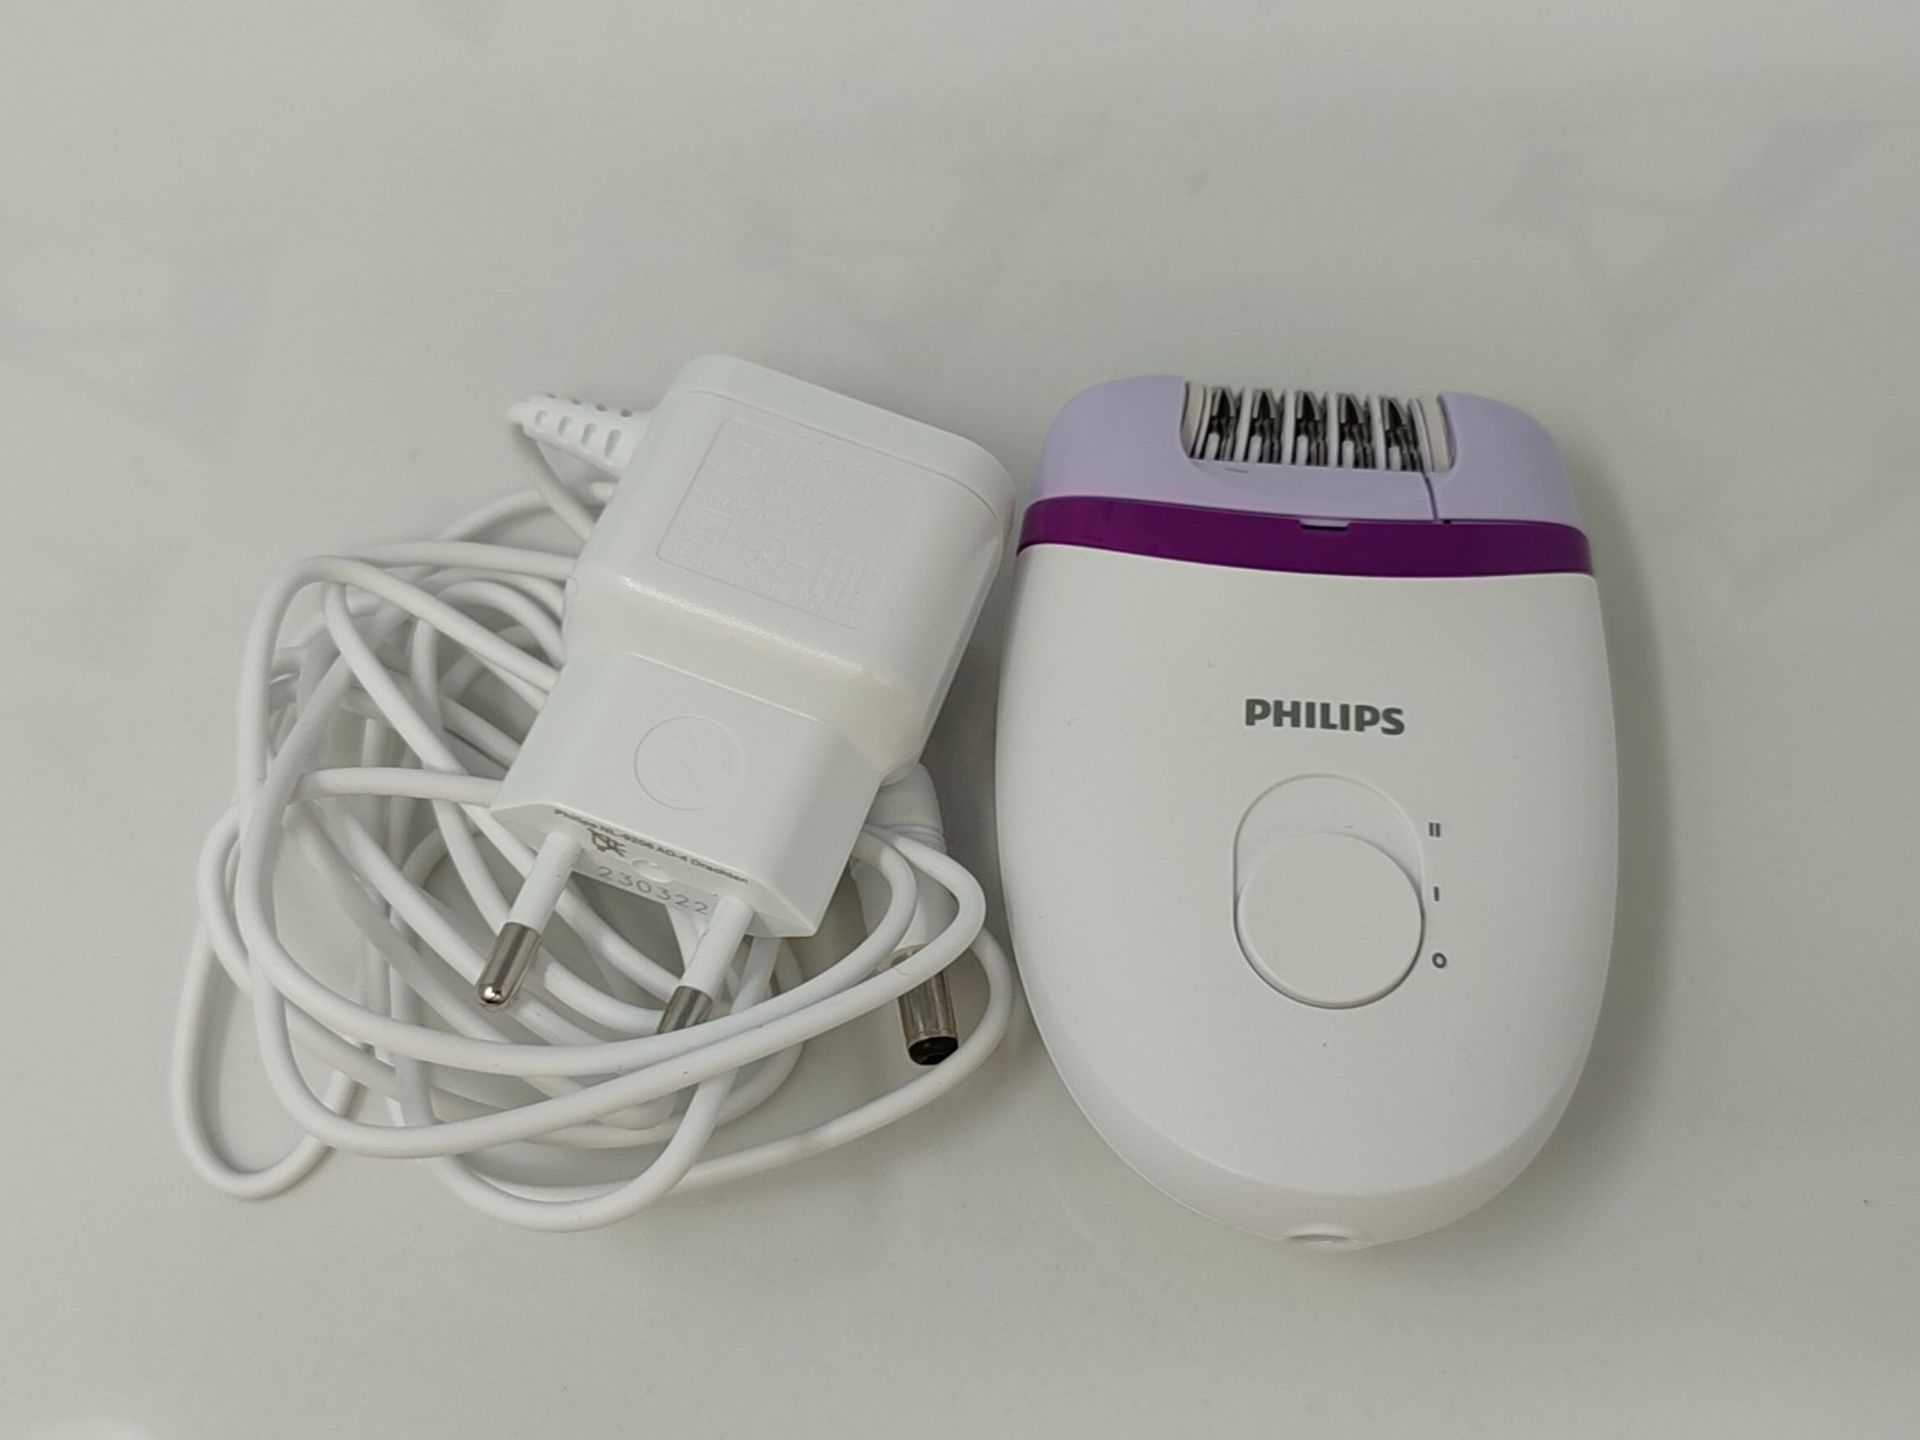 Philips Satinelle Essential Epilator with 21 attachments and 2 speed settings (model B - Image 4 of 4